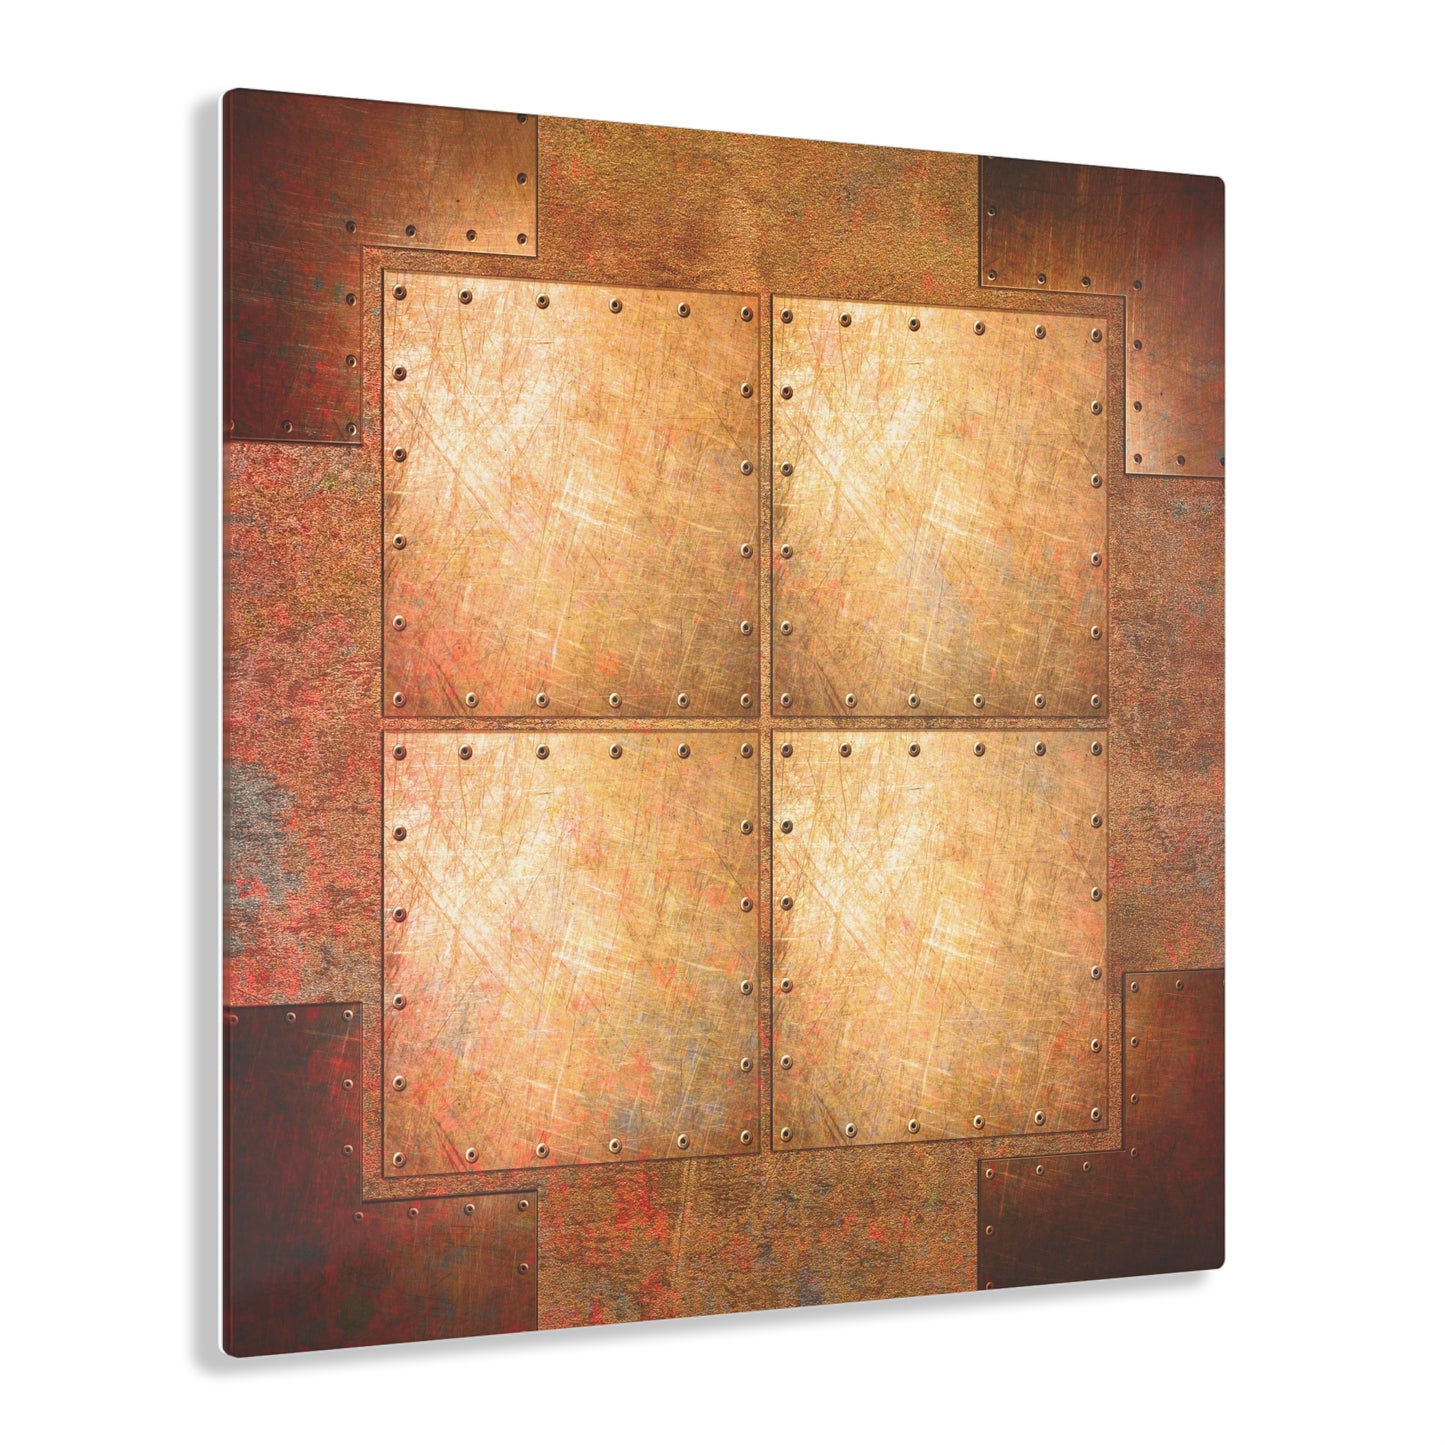 Steampunk and Industrial Wall Art - Riveted Copper Sheets Printed on a Crystal Clear Acrylic Panel 20x20